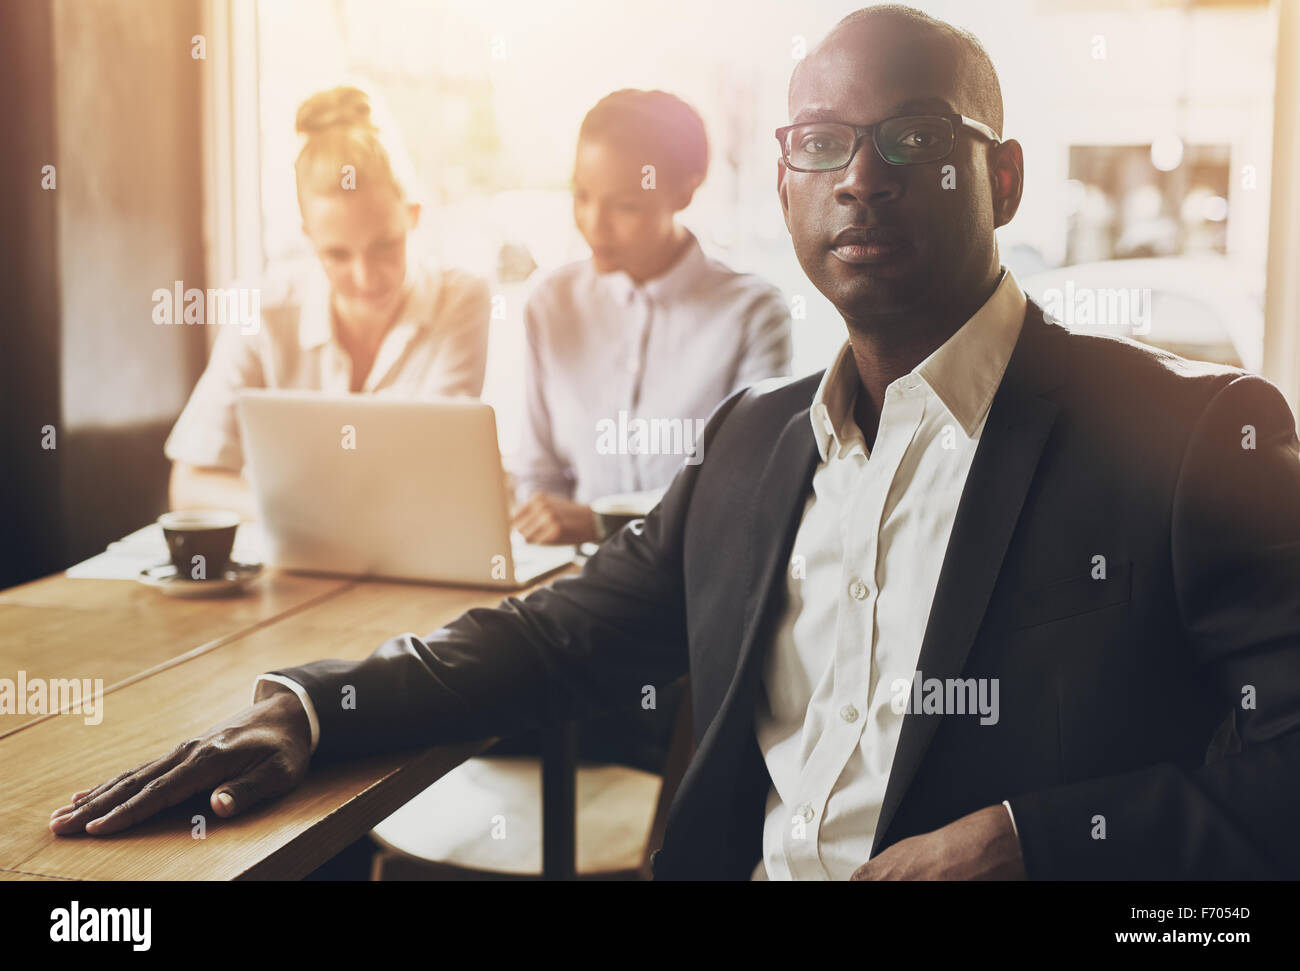 Relaxed black business man at office, people in background Stock Photo